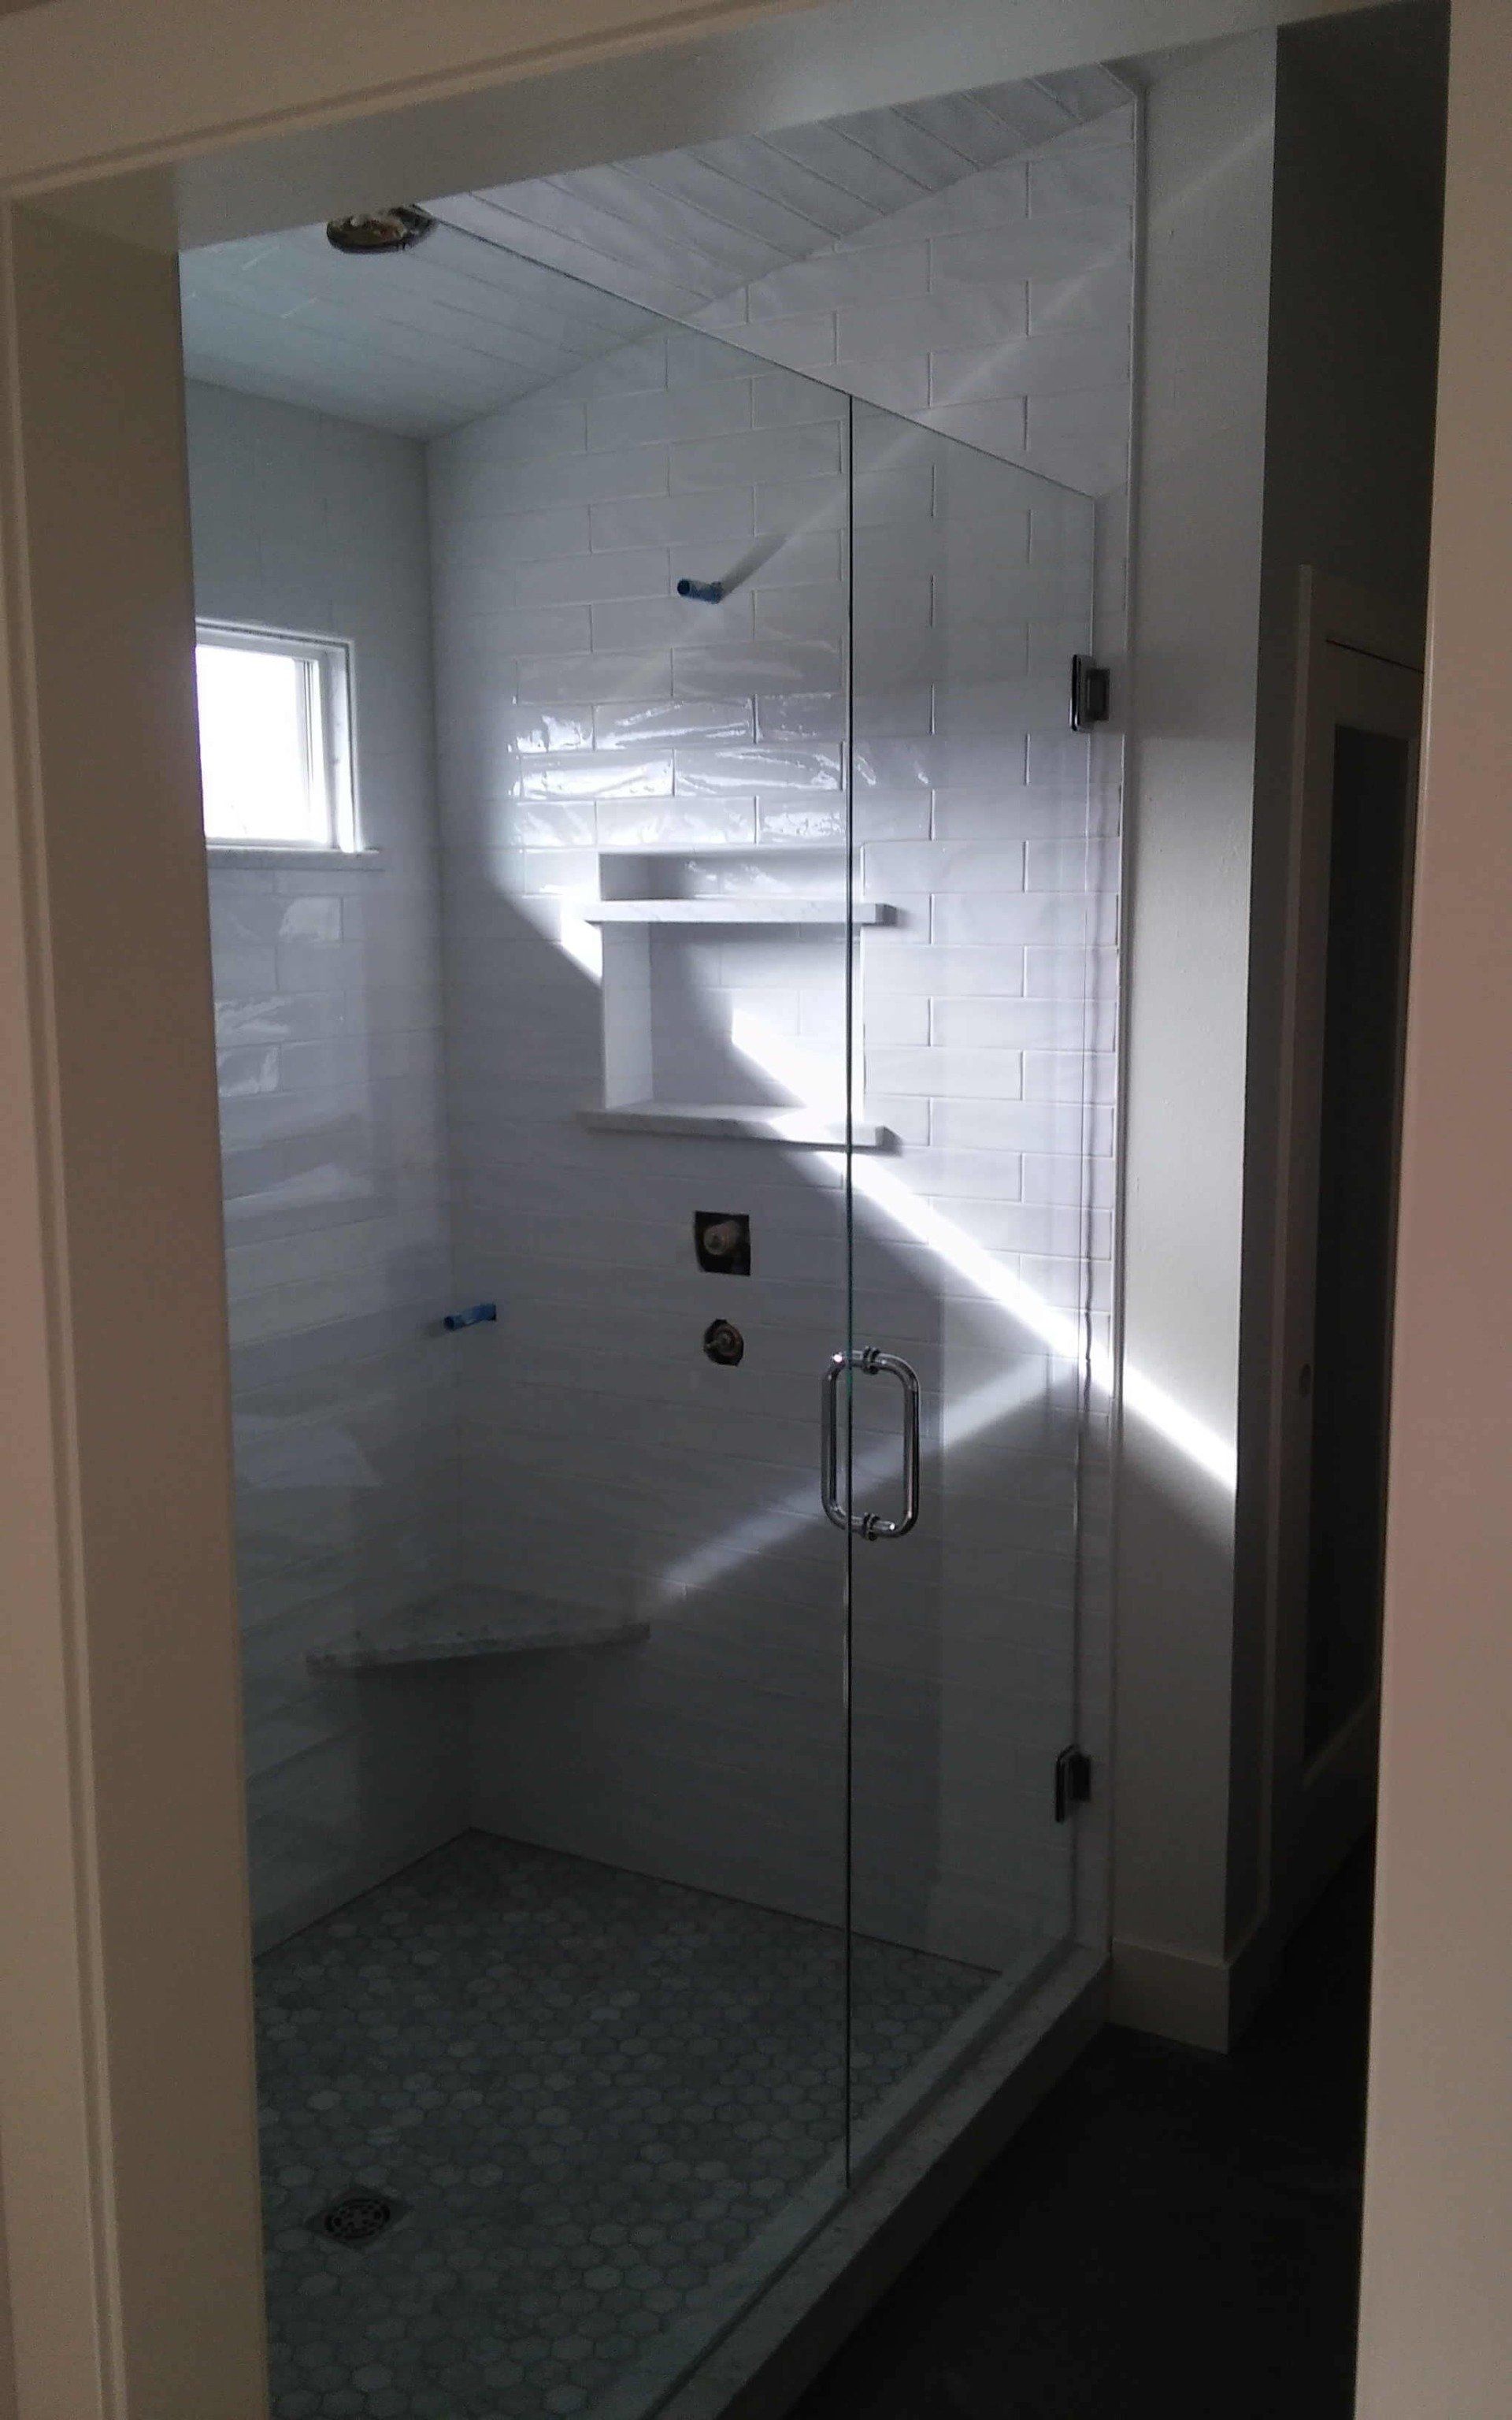 Tile Shower with Window - Glass Shop in Littleton, CO